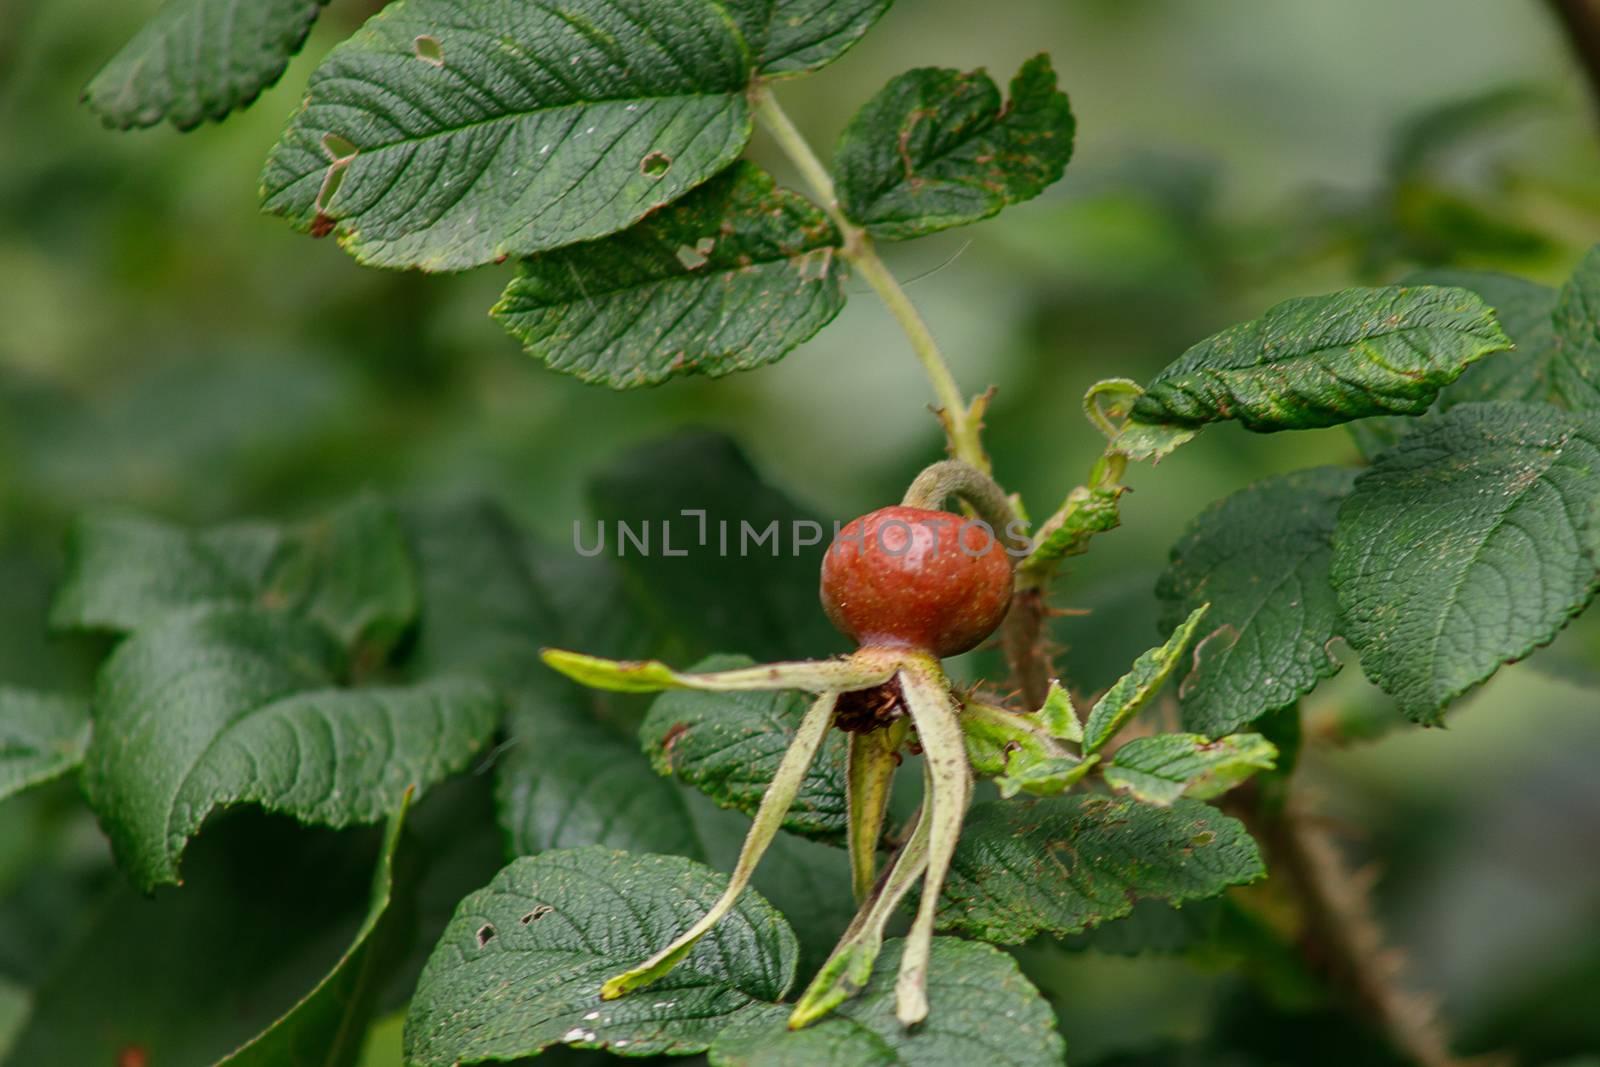 Red rose hips on a background of green leaves. Autumn berries. Useful medicinal plants. Vitamin C